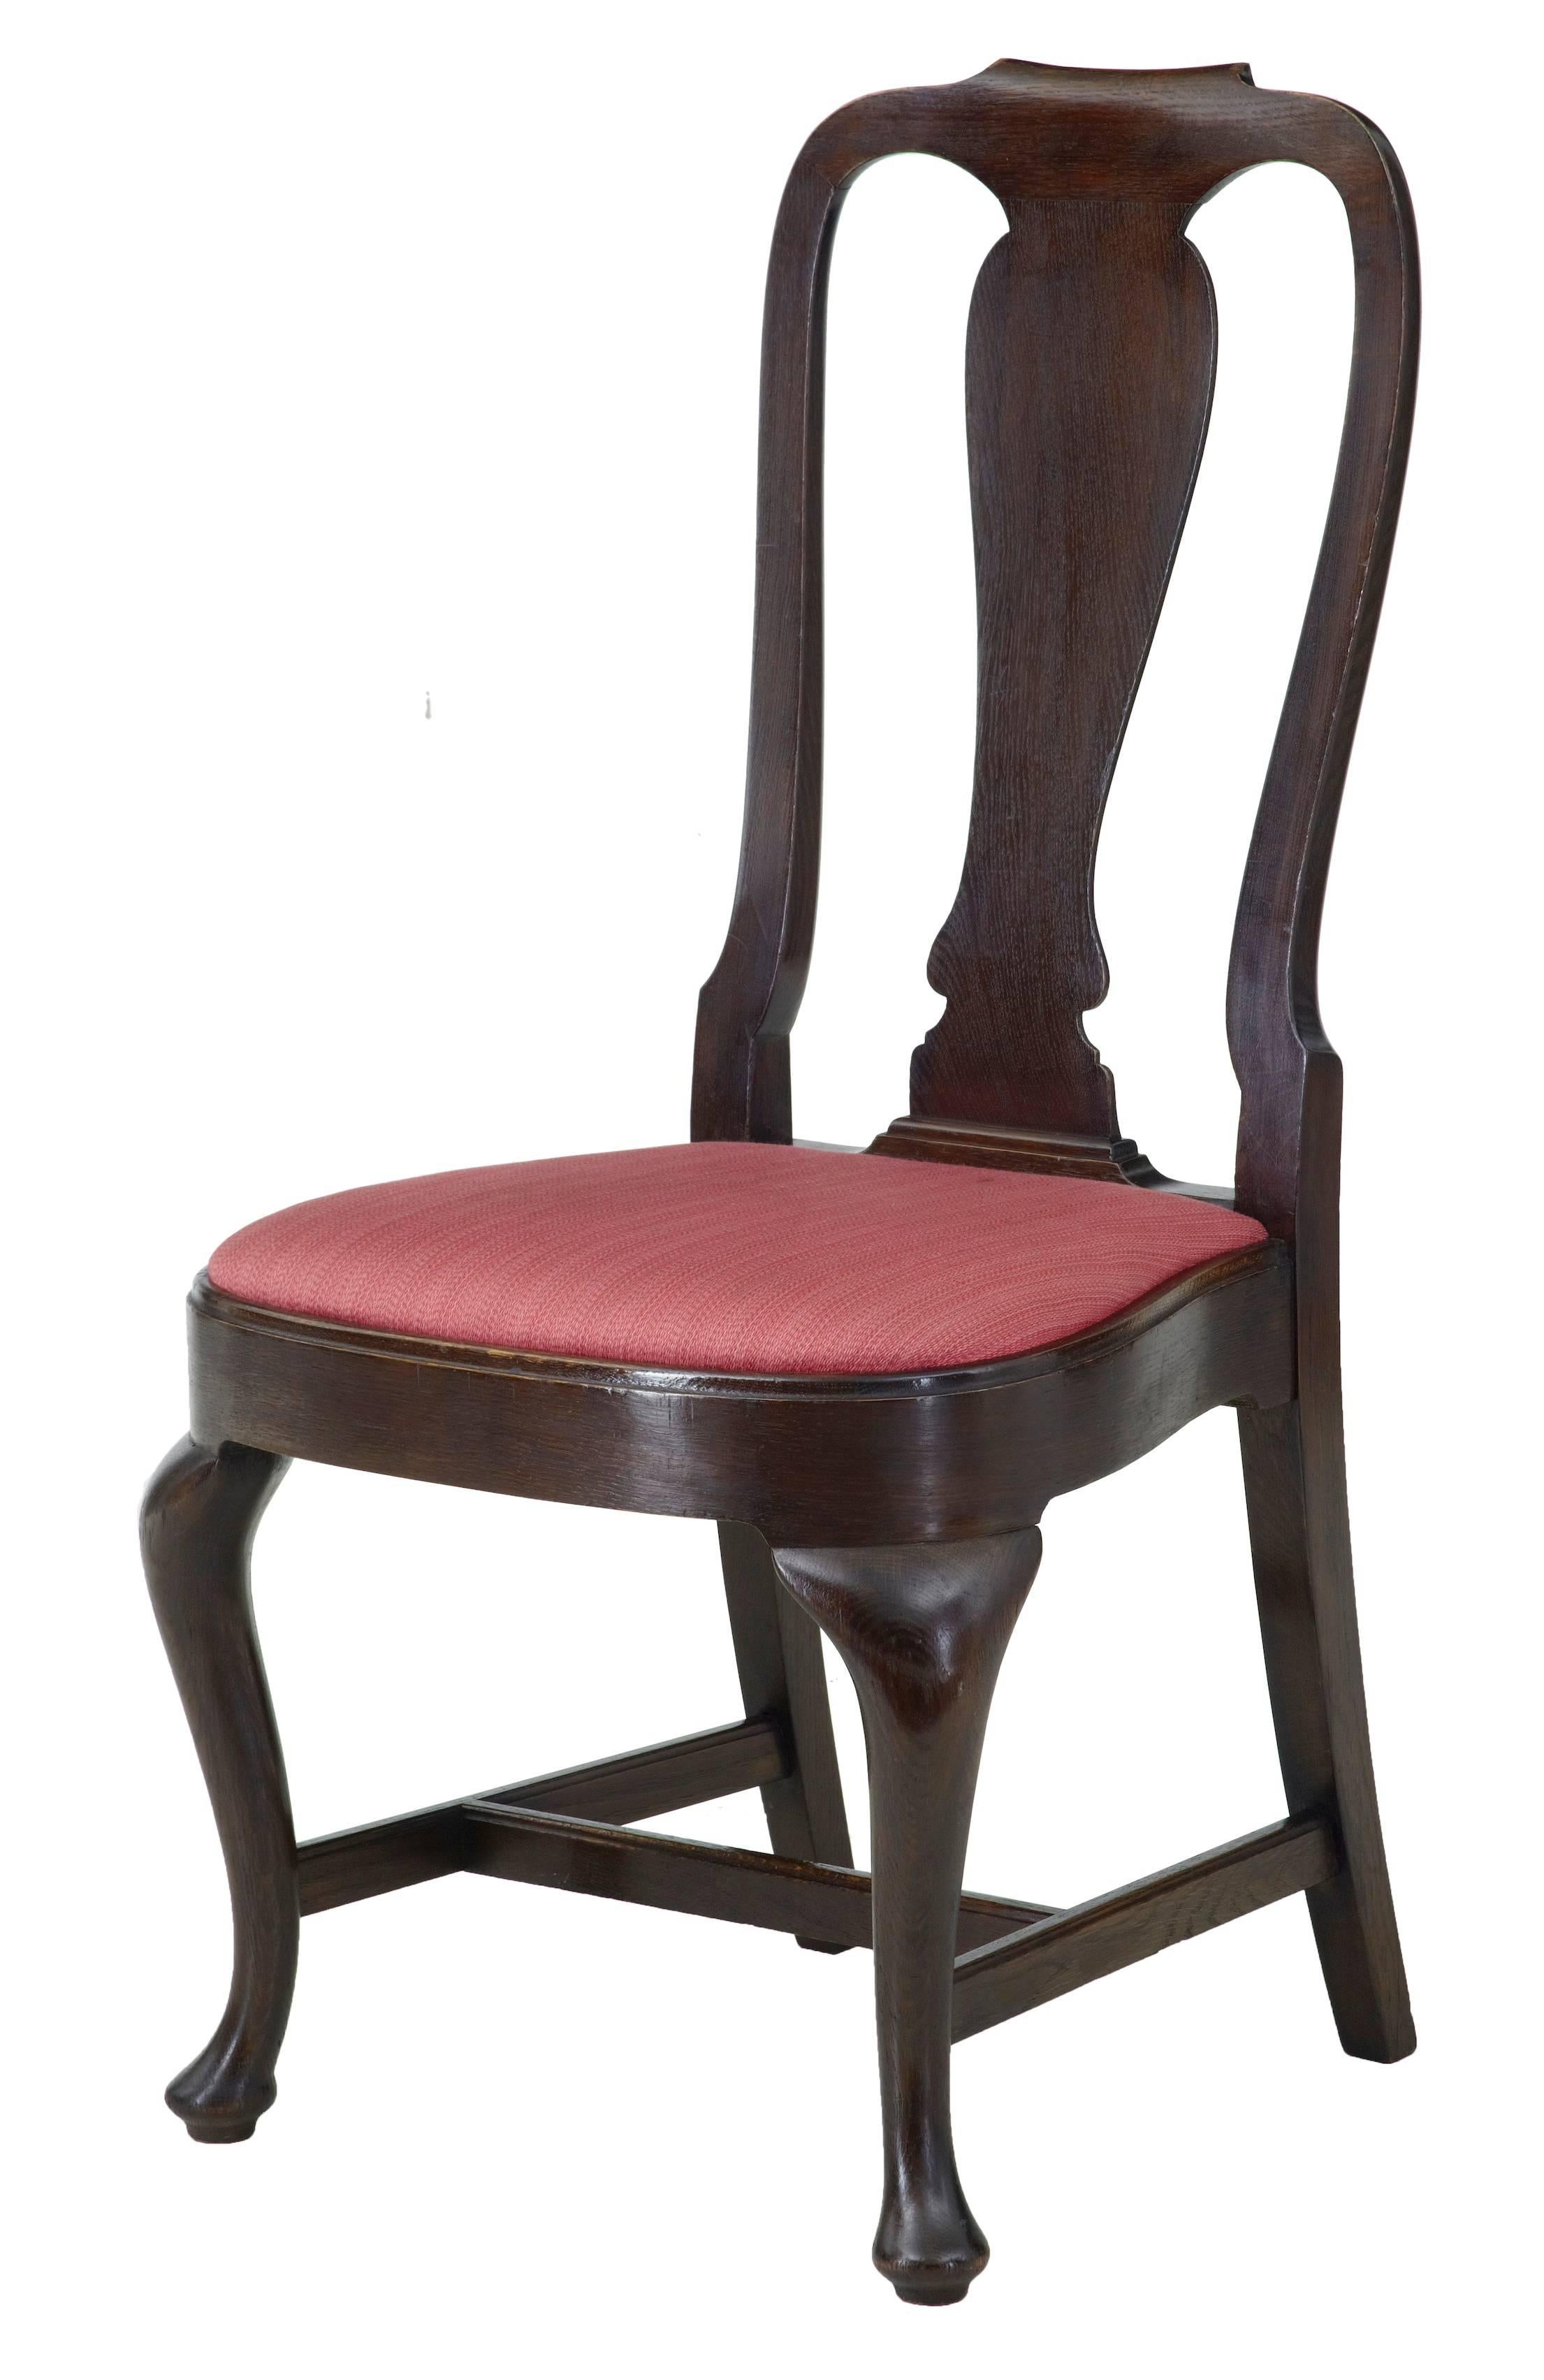 Rare set of 12 fine oak dining chairs from the 1920s.
Made from a Queen Anne design.
Cabriole front legs terminating on pad foot.
Seat inserts would benefit a clean, but in respectable condition.

Measures: Height 39 1/4